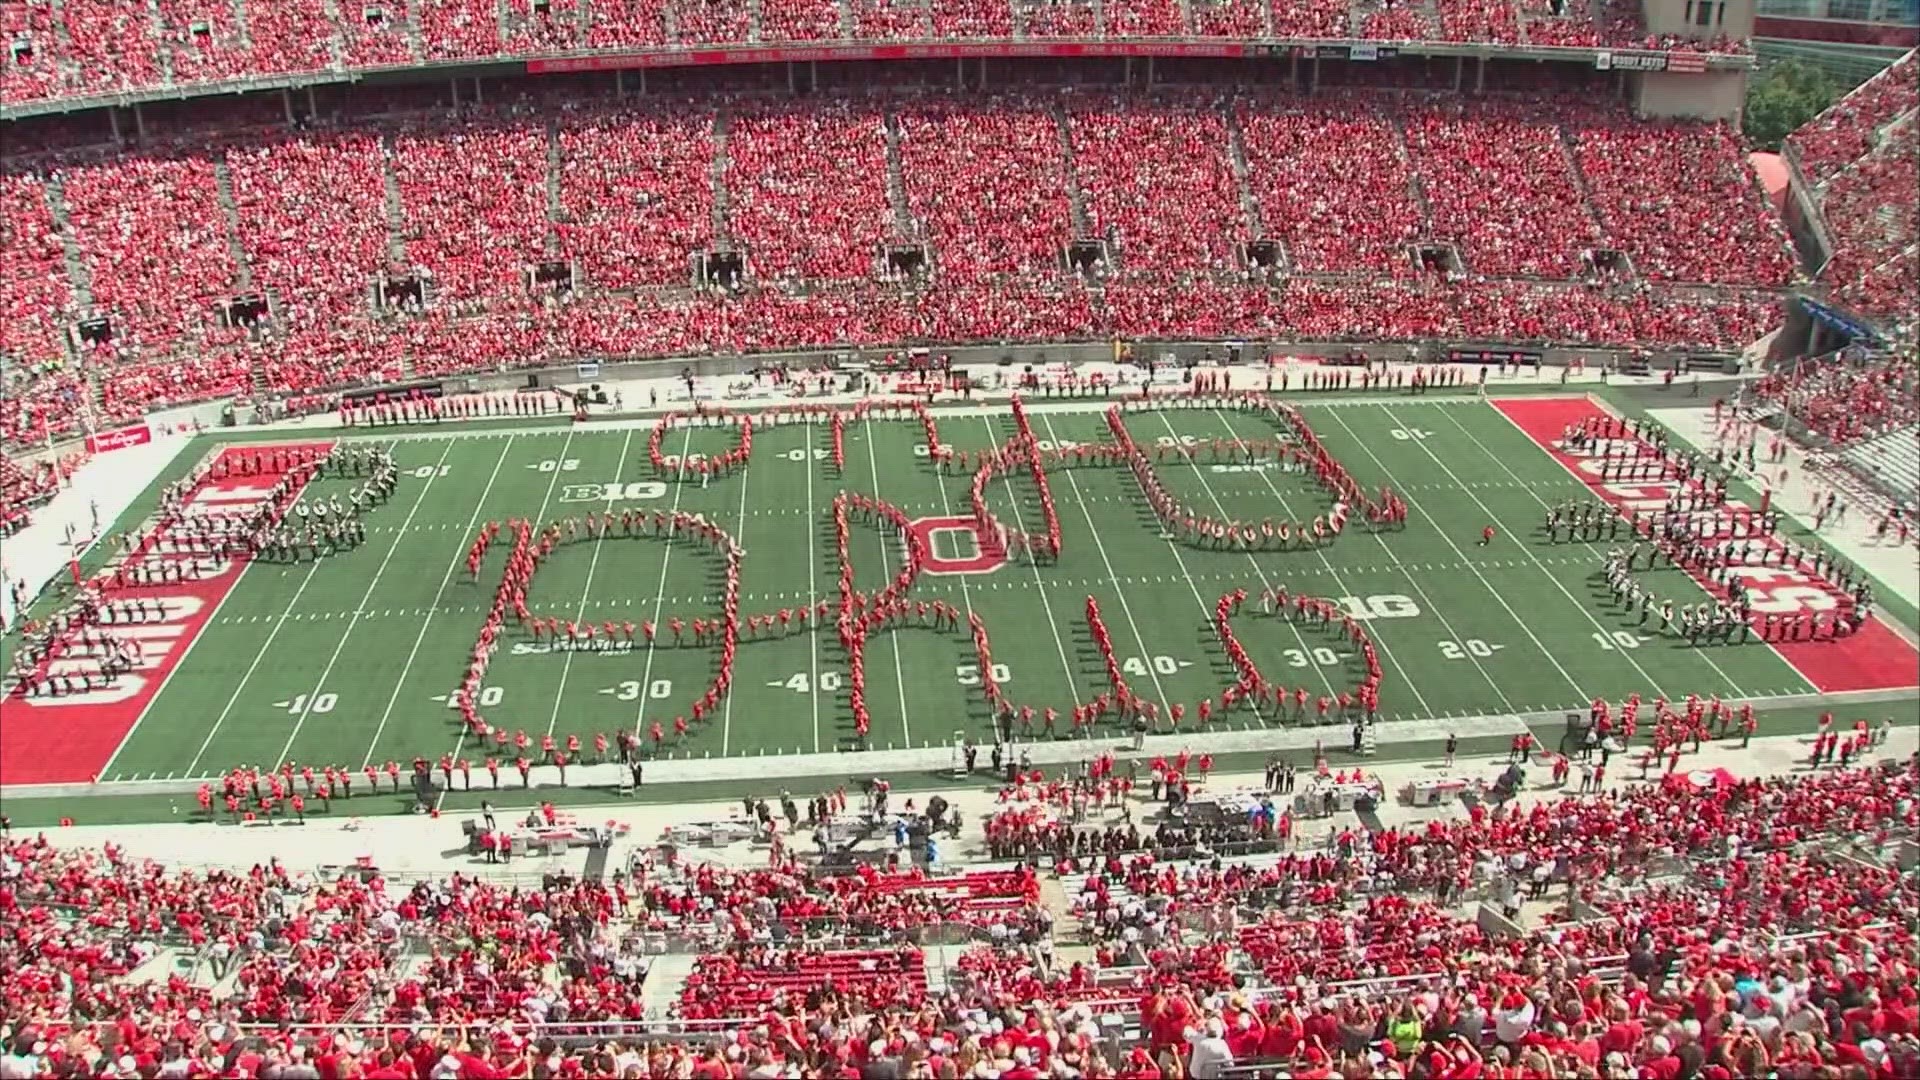 Ohio State announces plans to partially reopen campuses for in